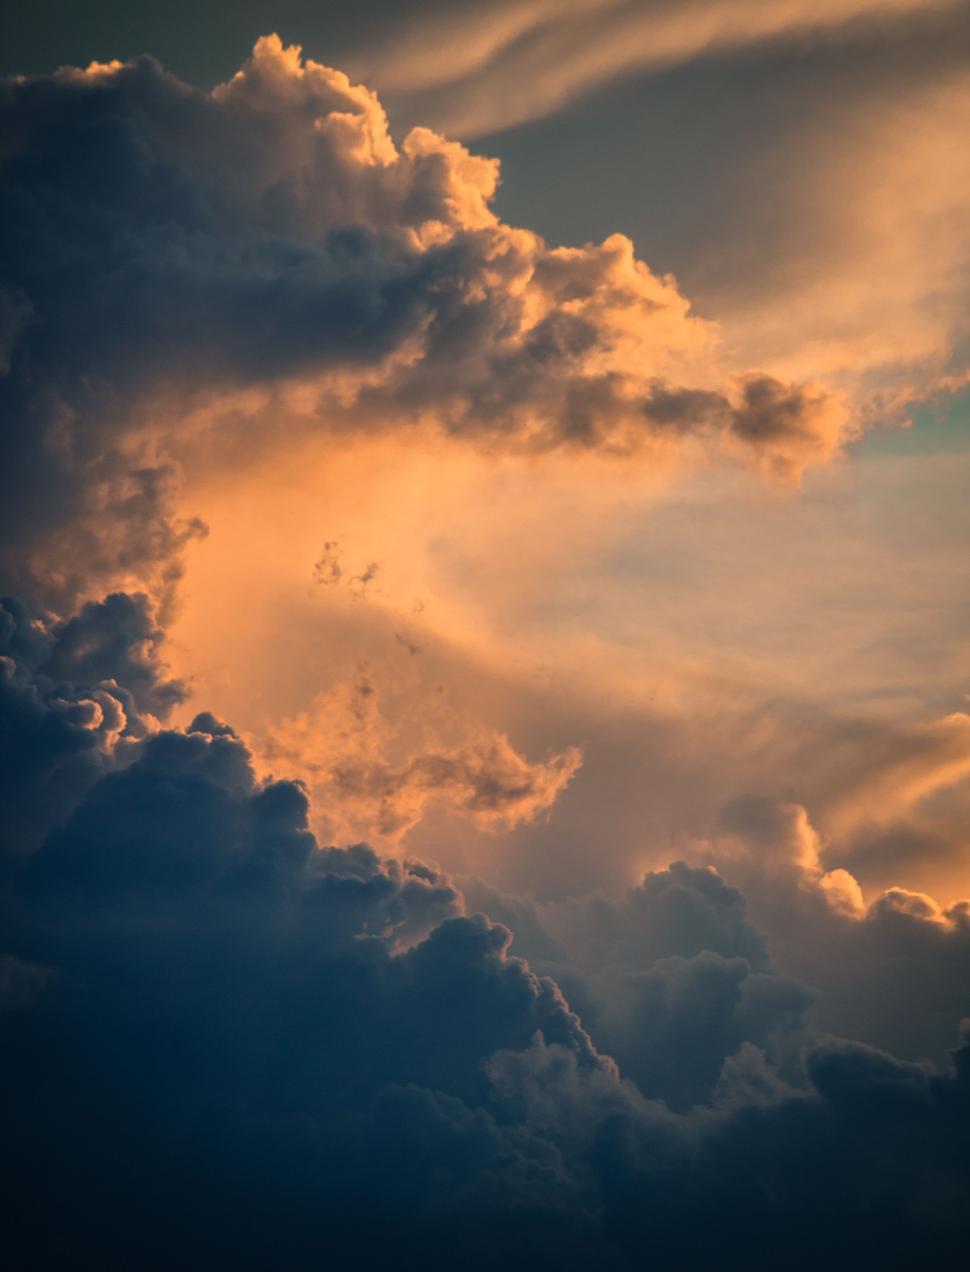 Free Image of Plane Flying Through Cloudy Sky at Sunset 